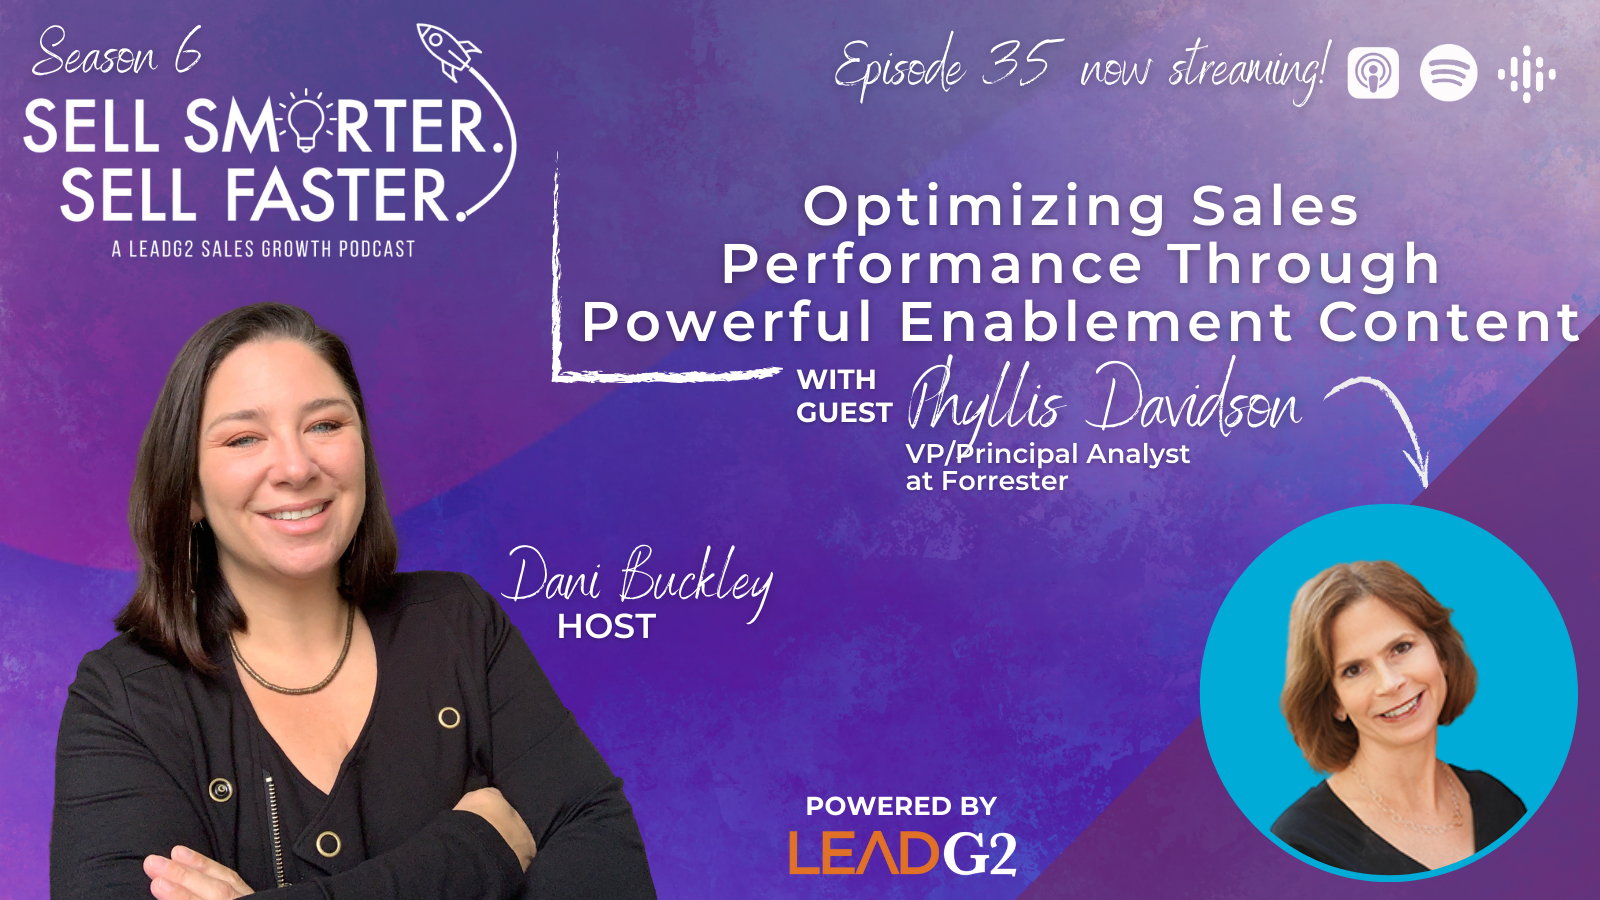 Optimizing Sales Performance through Powerful Enablement Content with Phyllis Davidson 